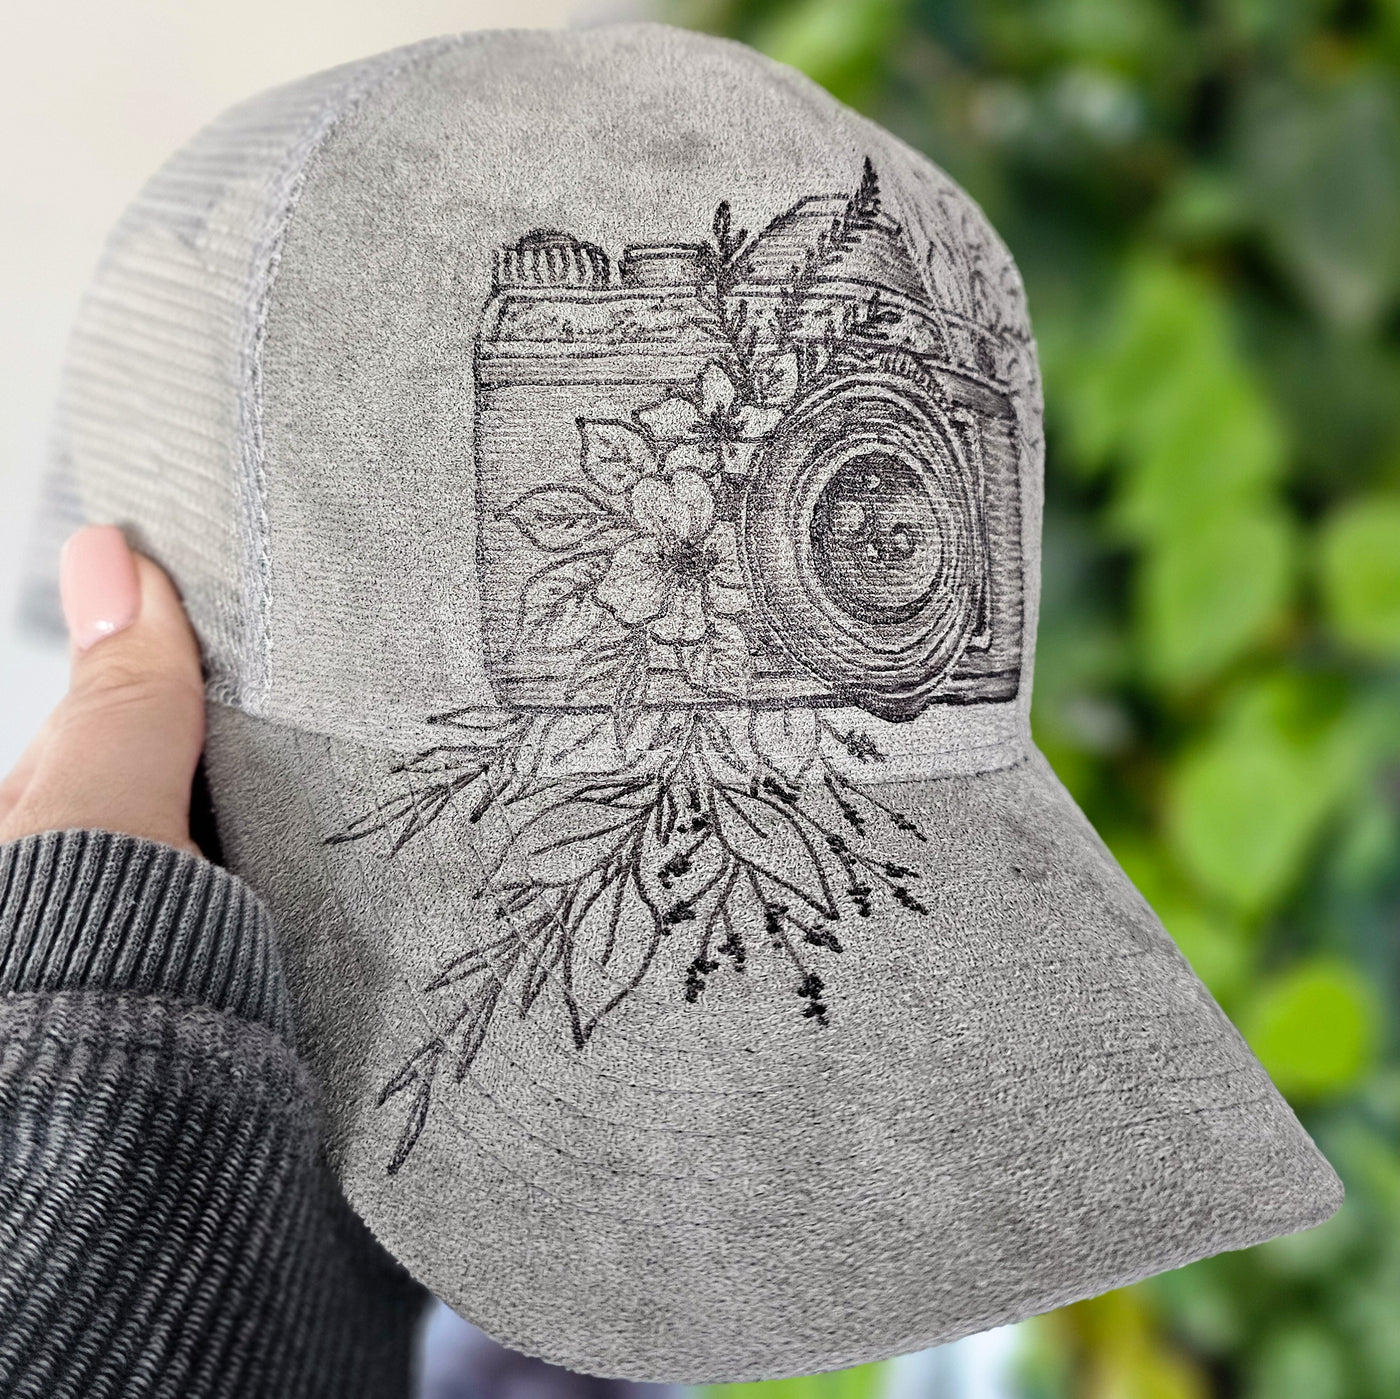 Floral Camera || Gray Suede Baseball Style Mesh Trucker Hat || Freehand Burned